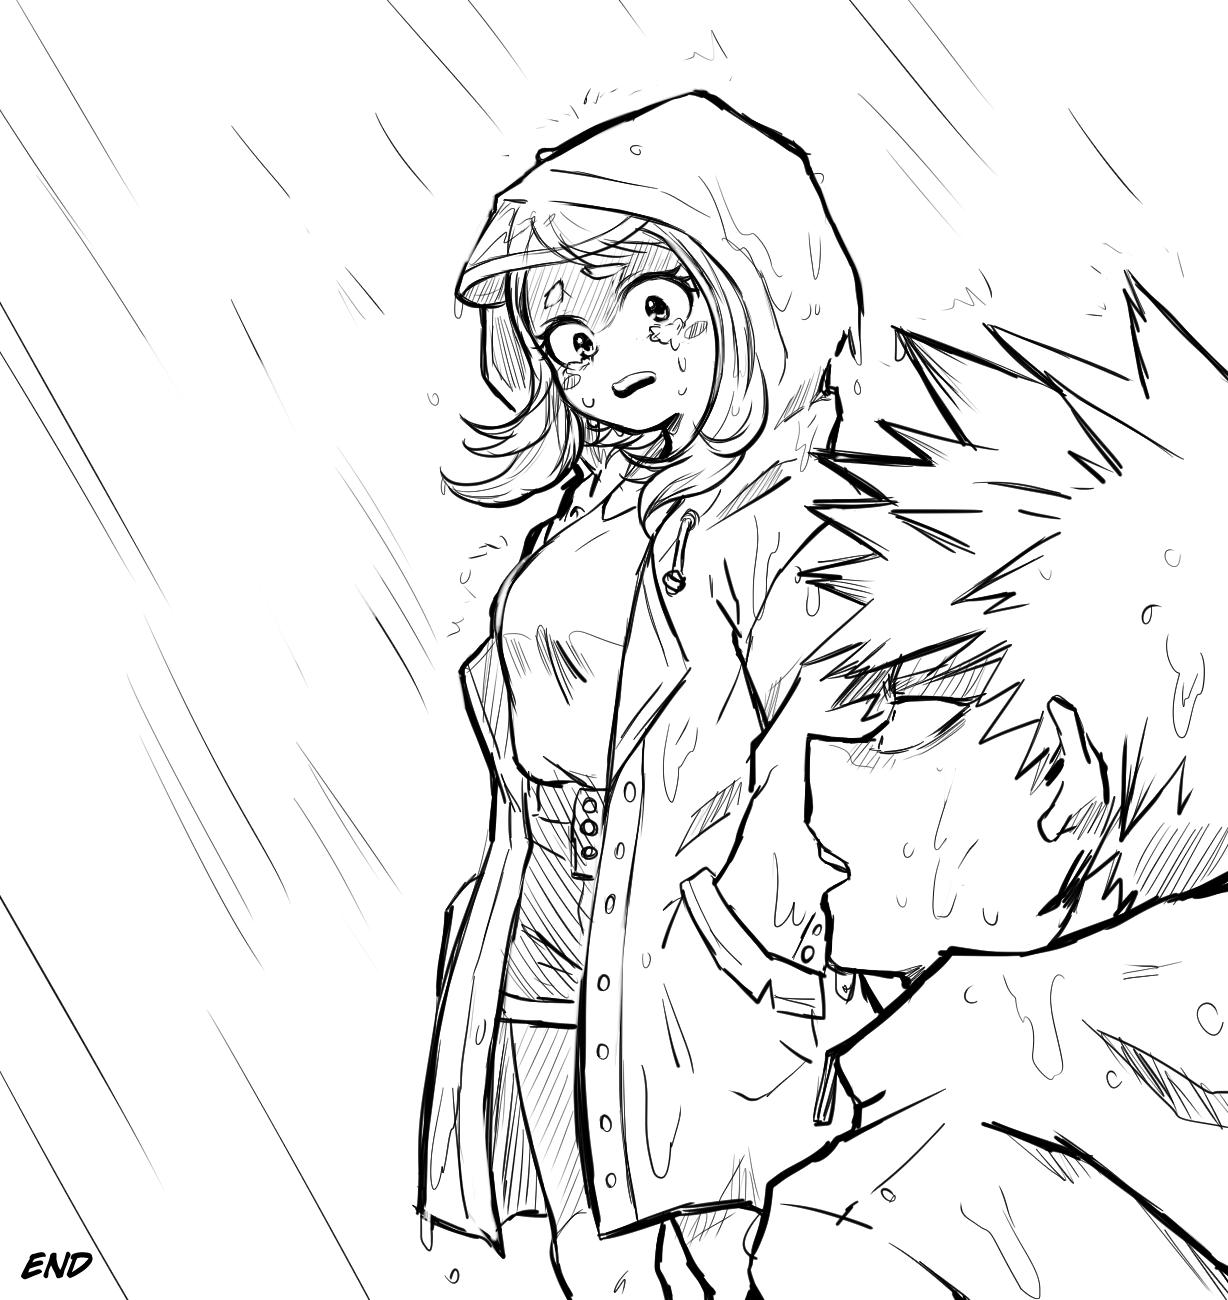 “I'm sorry after I saw Horikoshi's sketch this scene came t...